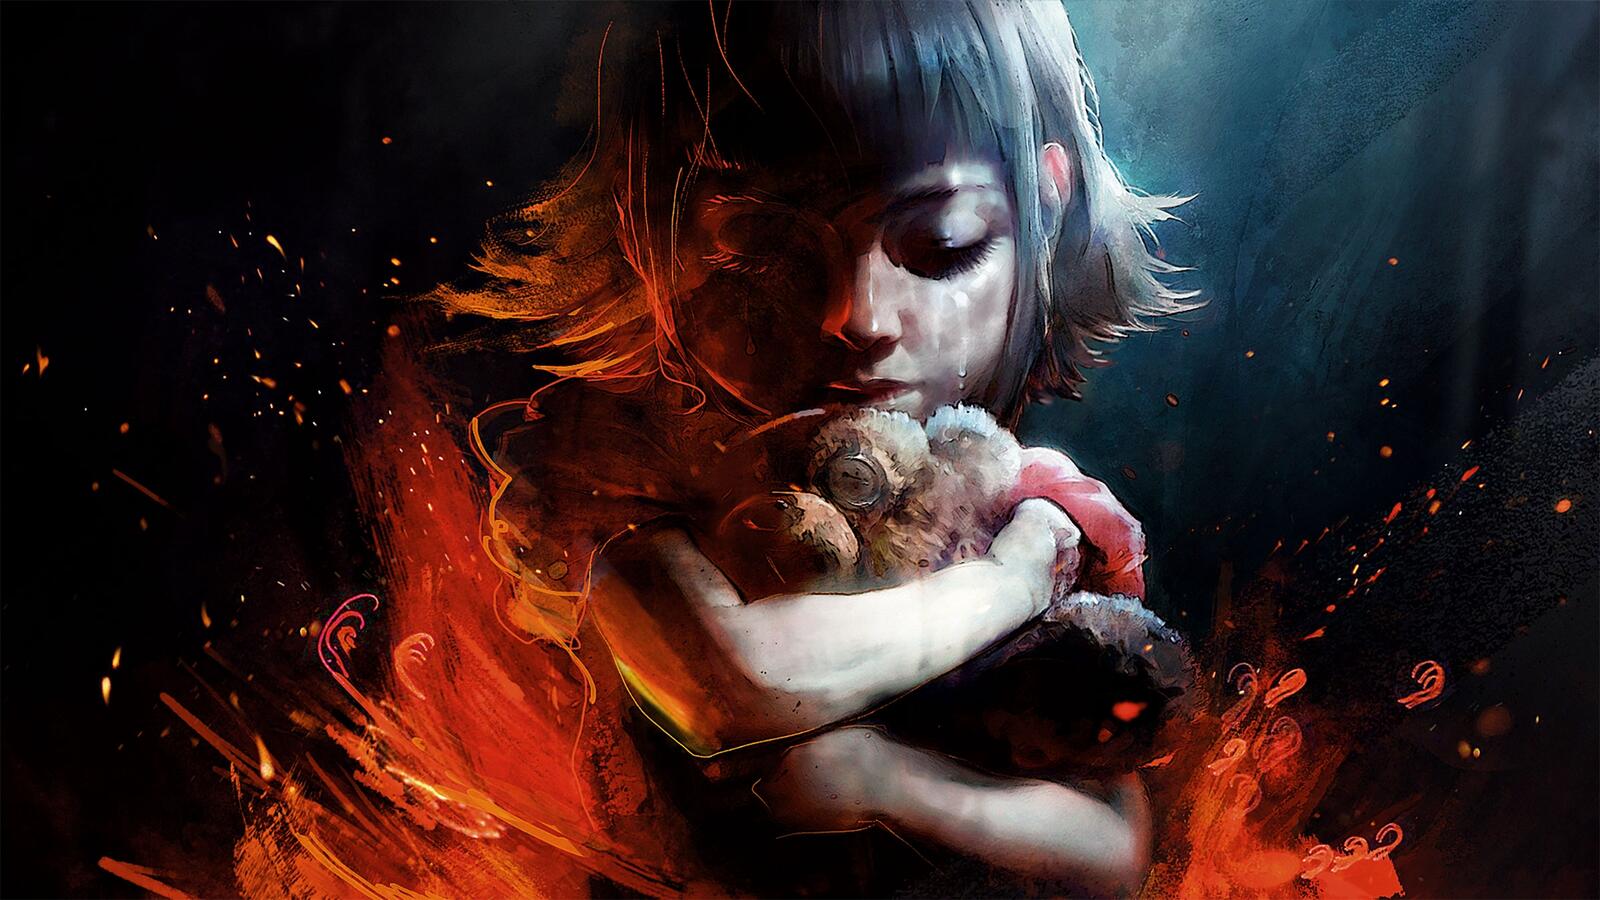 Wallpapers League of Legends Annie cry on the desktop